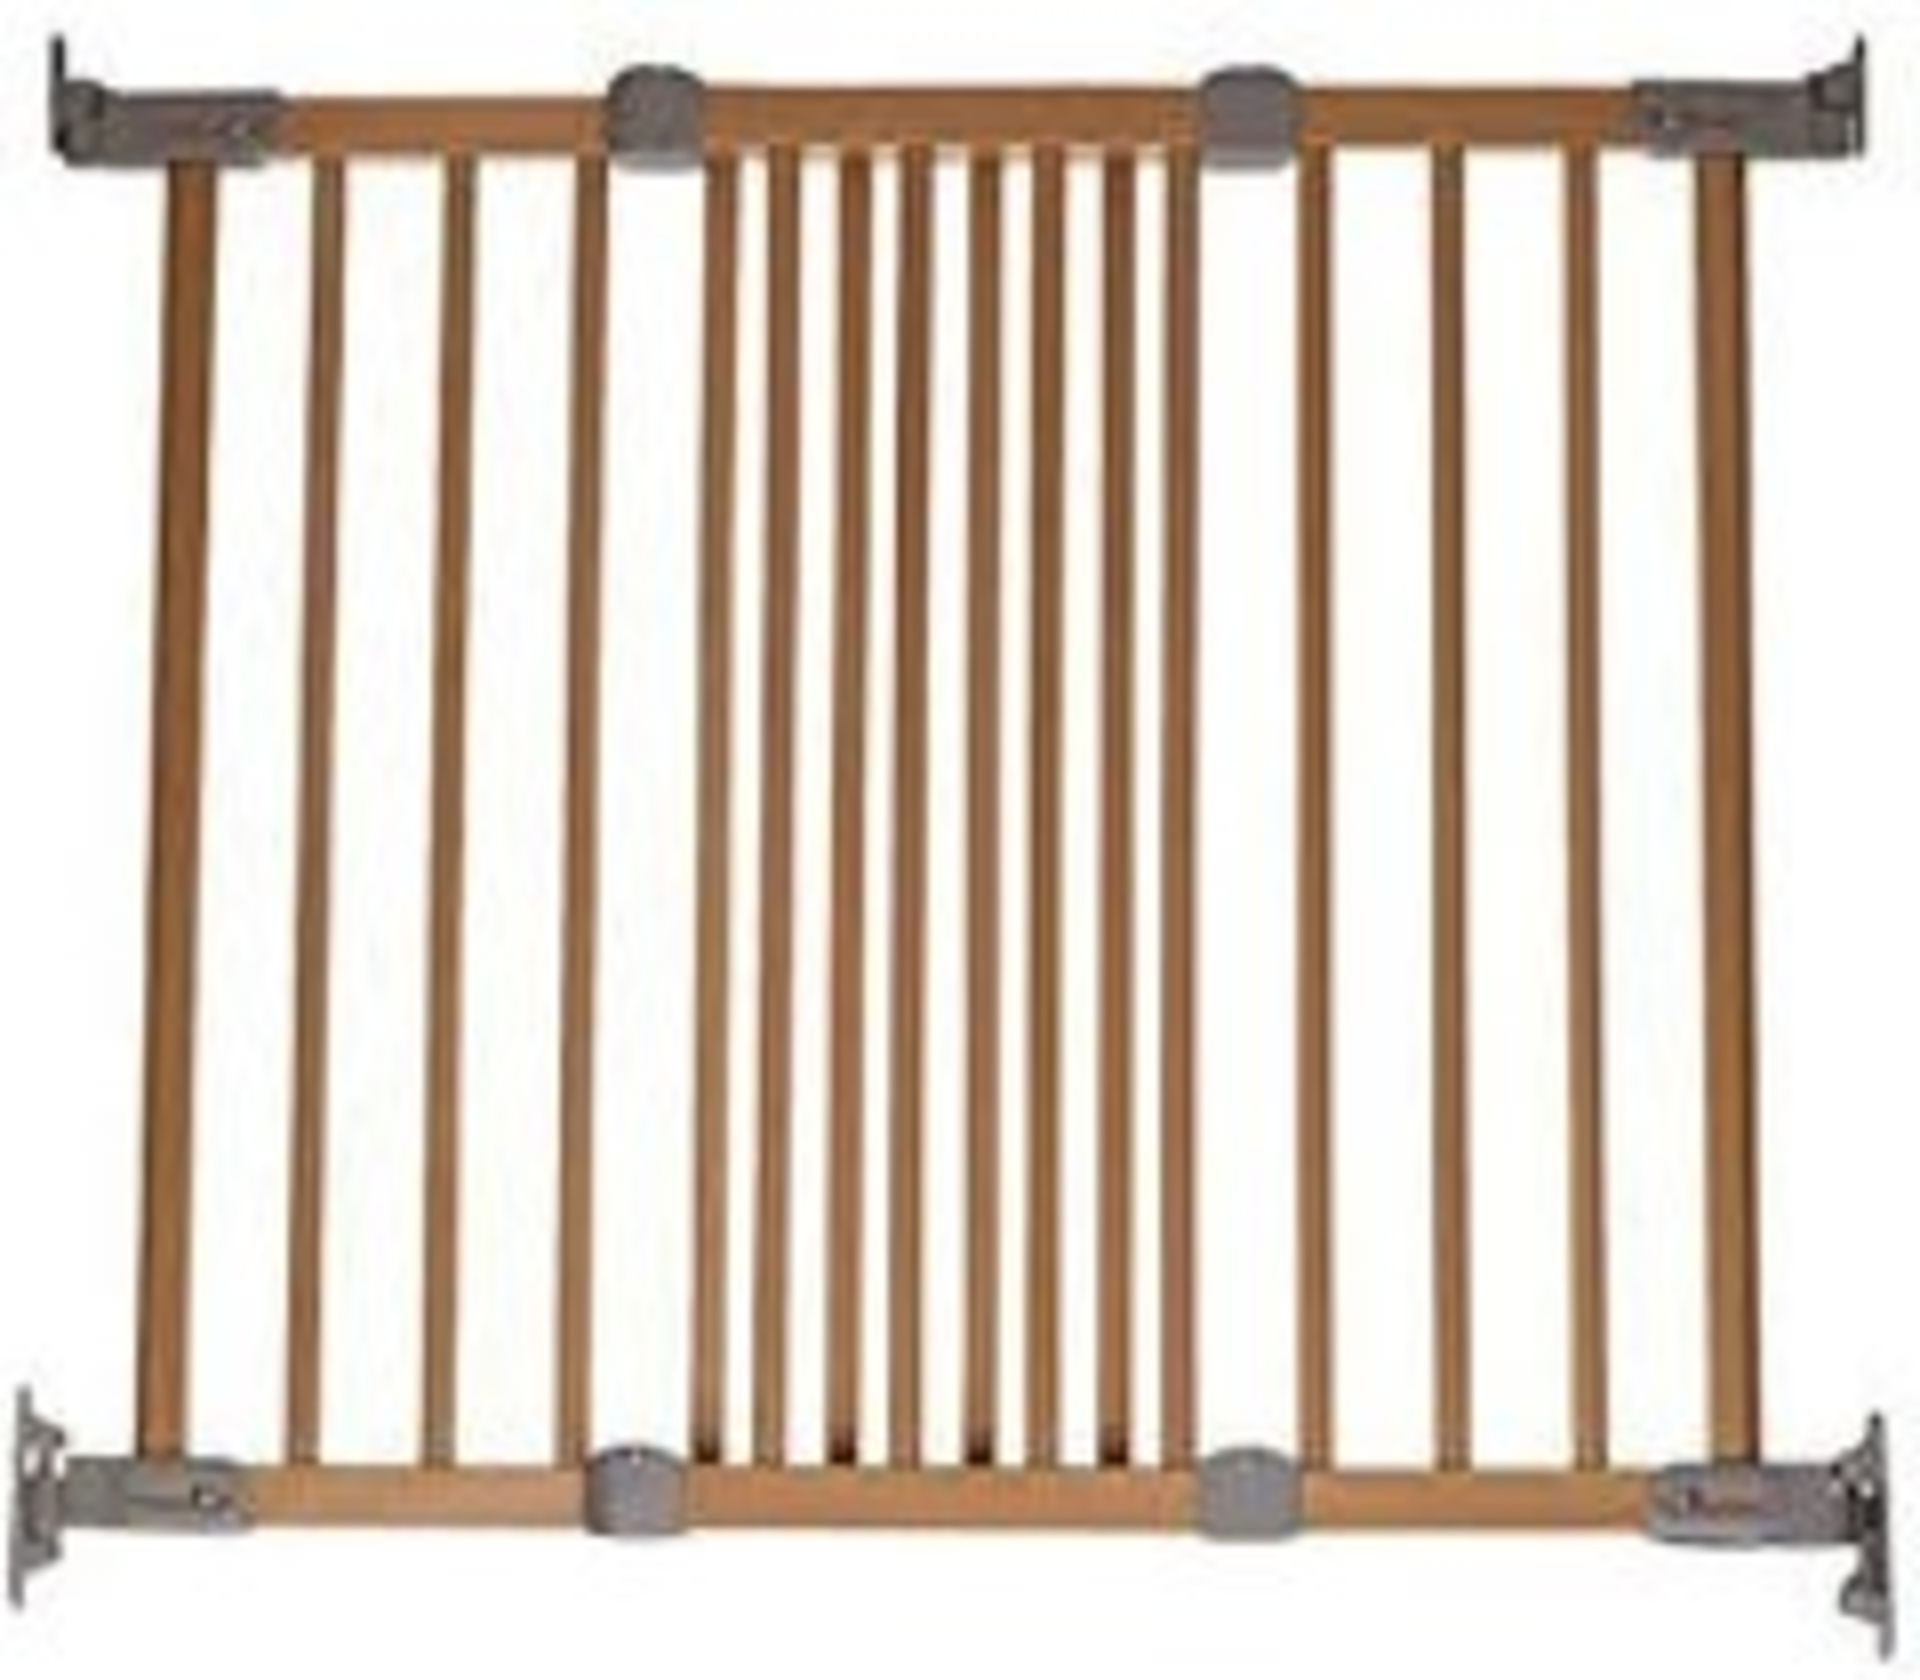 Boxed Assorted Wooden Baby Dan Flexy Fit Wooden Baby Gates RRP £35 (3386163)(3386157) (Public